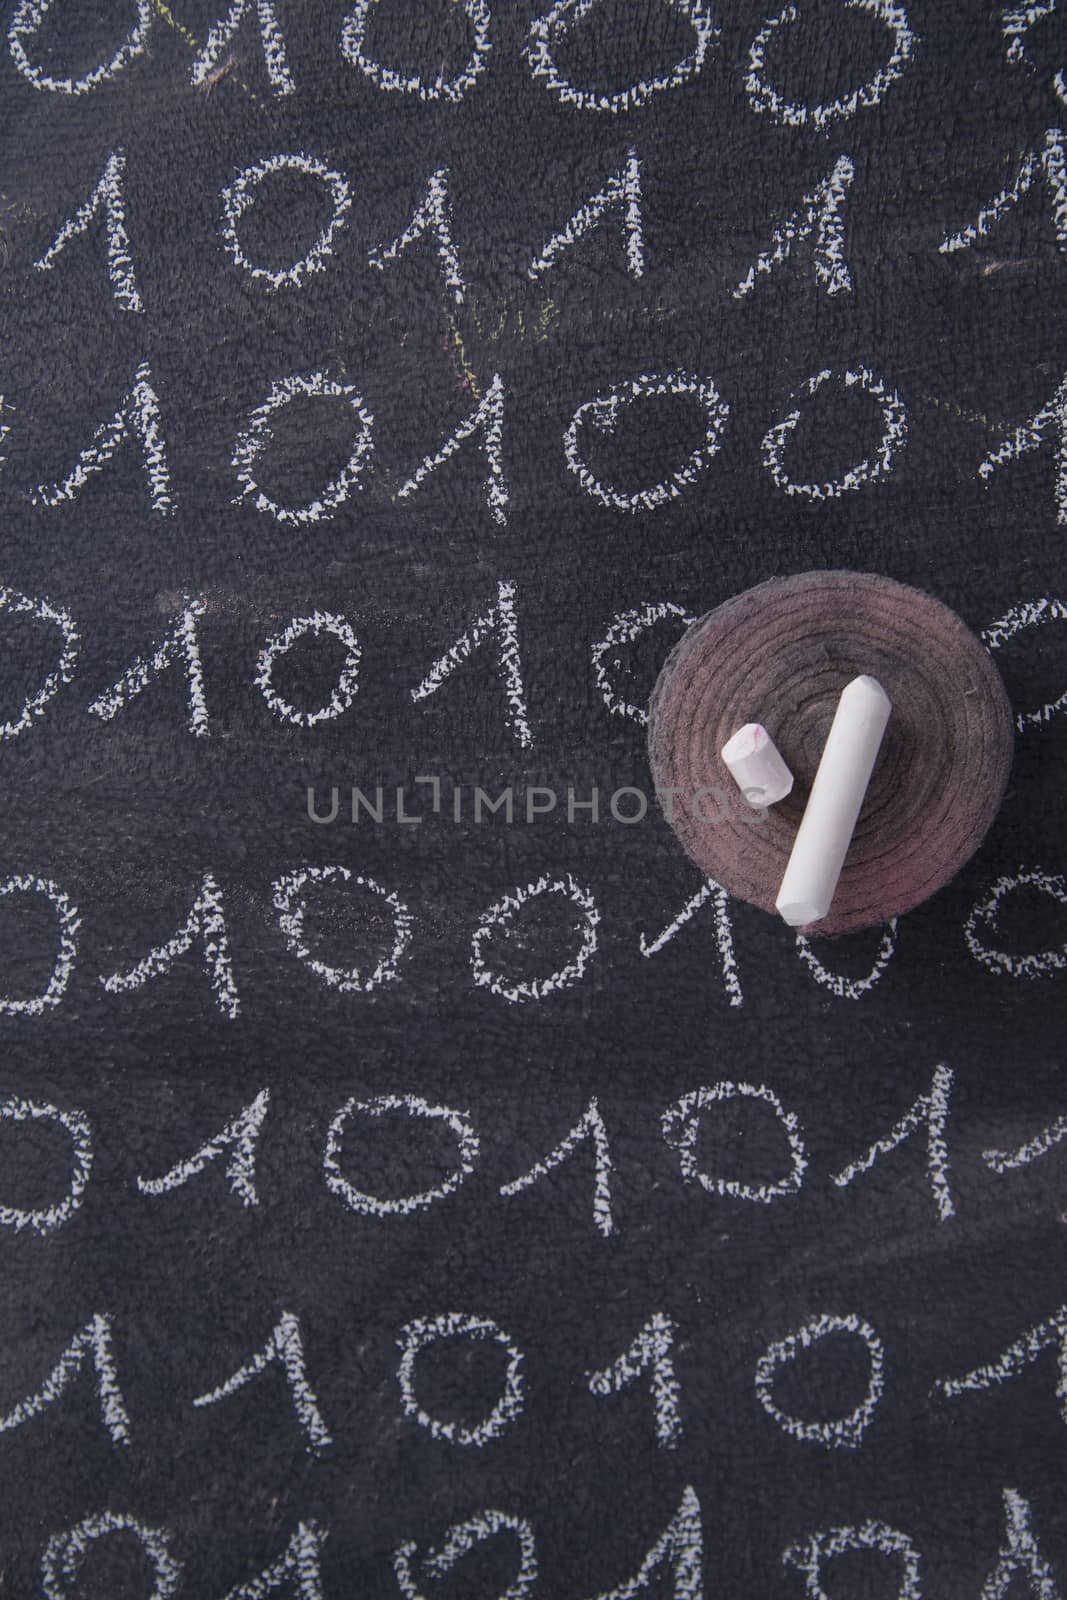 Binary number system by fotografiche.eu